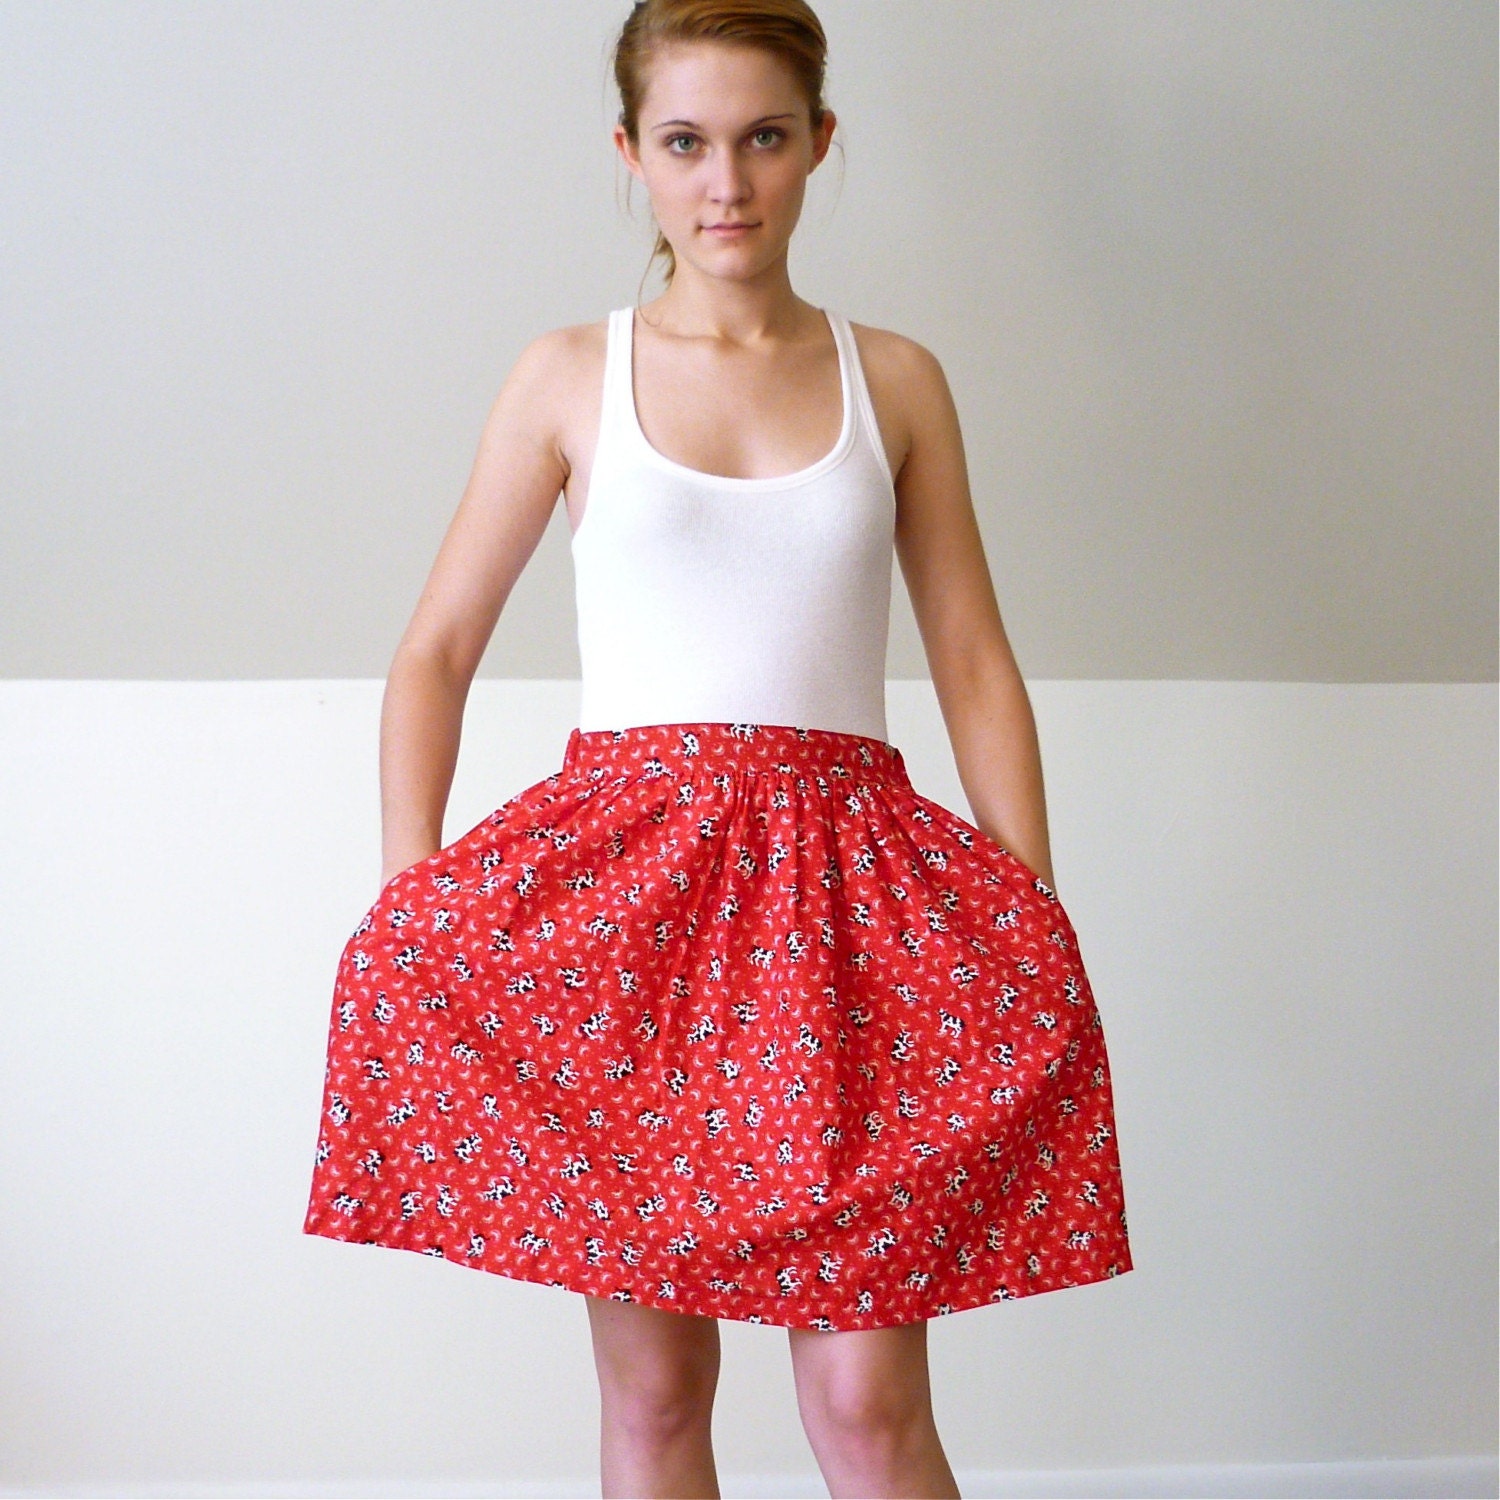 The Dairy Cow Mini Skirt